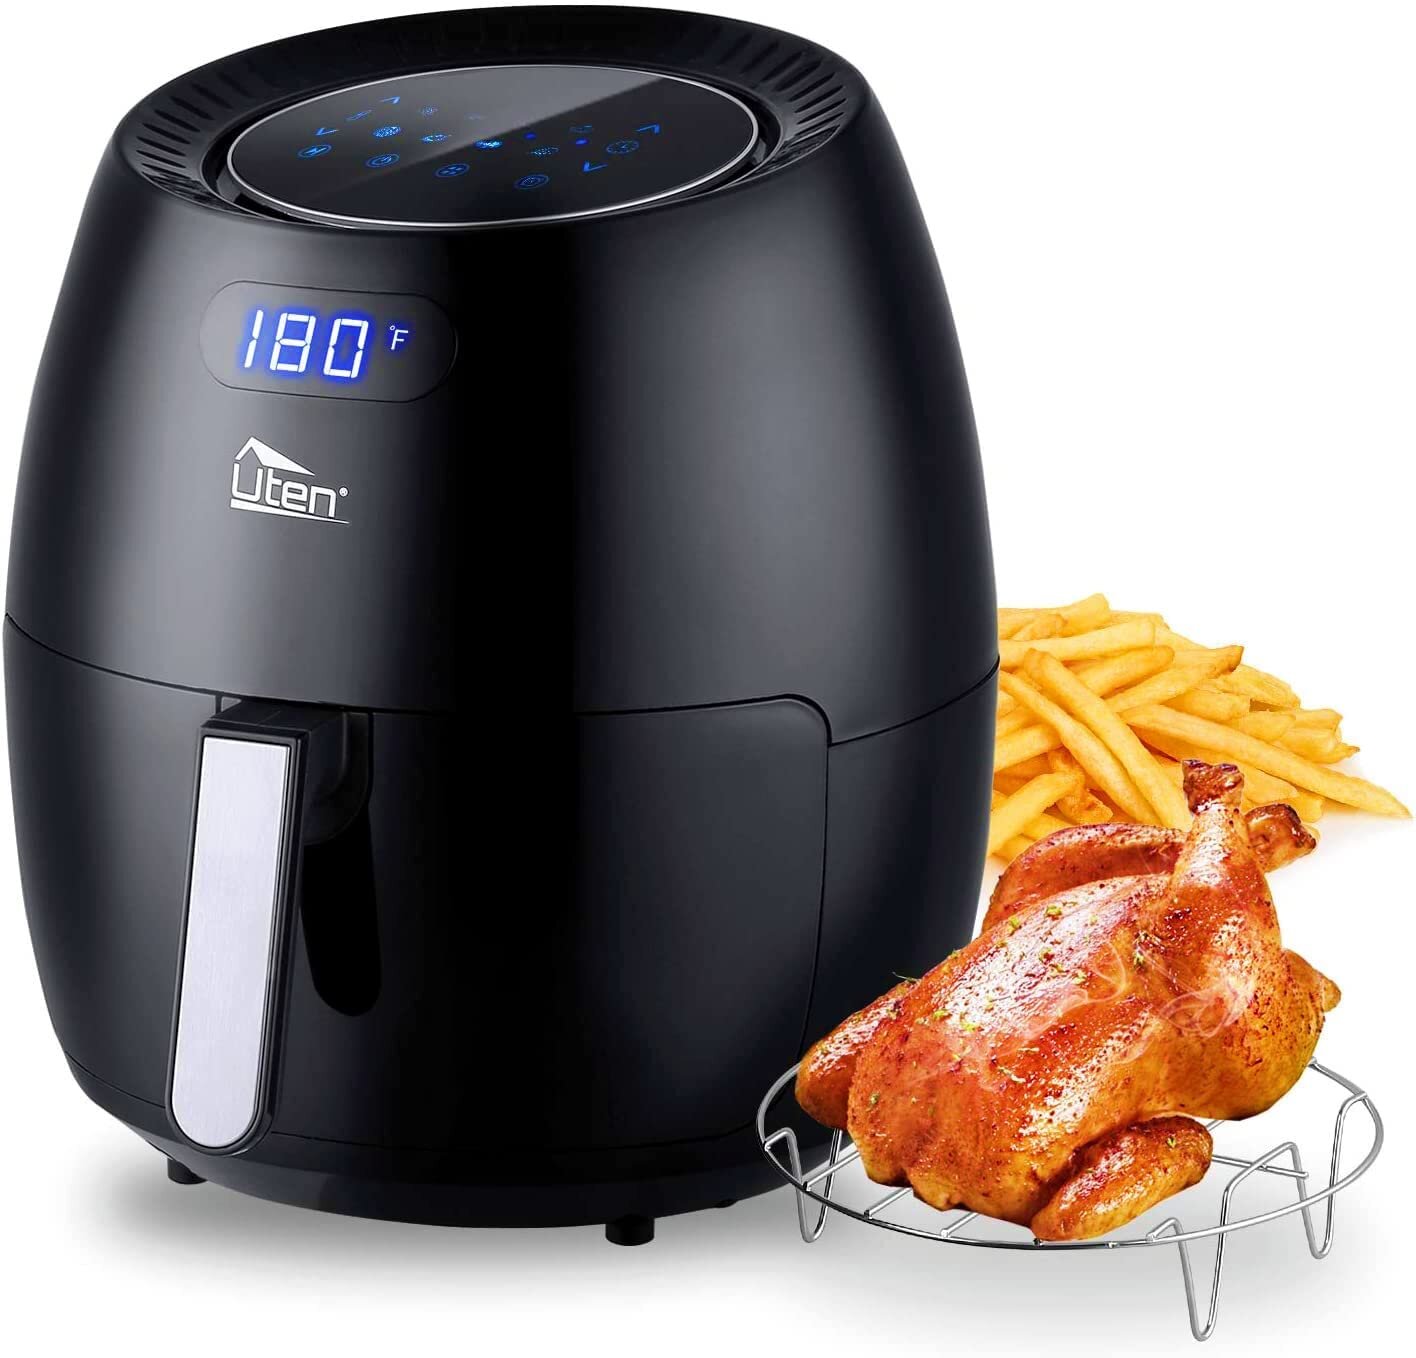 6.5L Air Fryer Pro, 12-in-1 XL Large Air fryer oven Cooker with